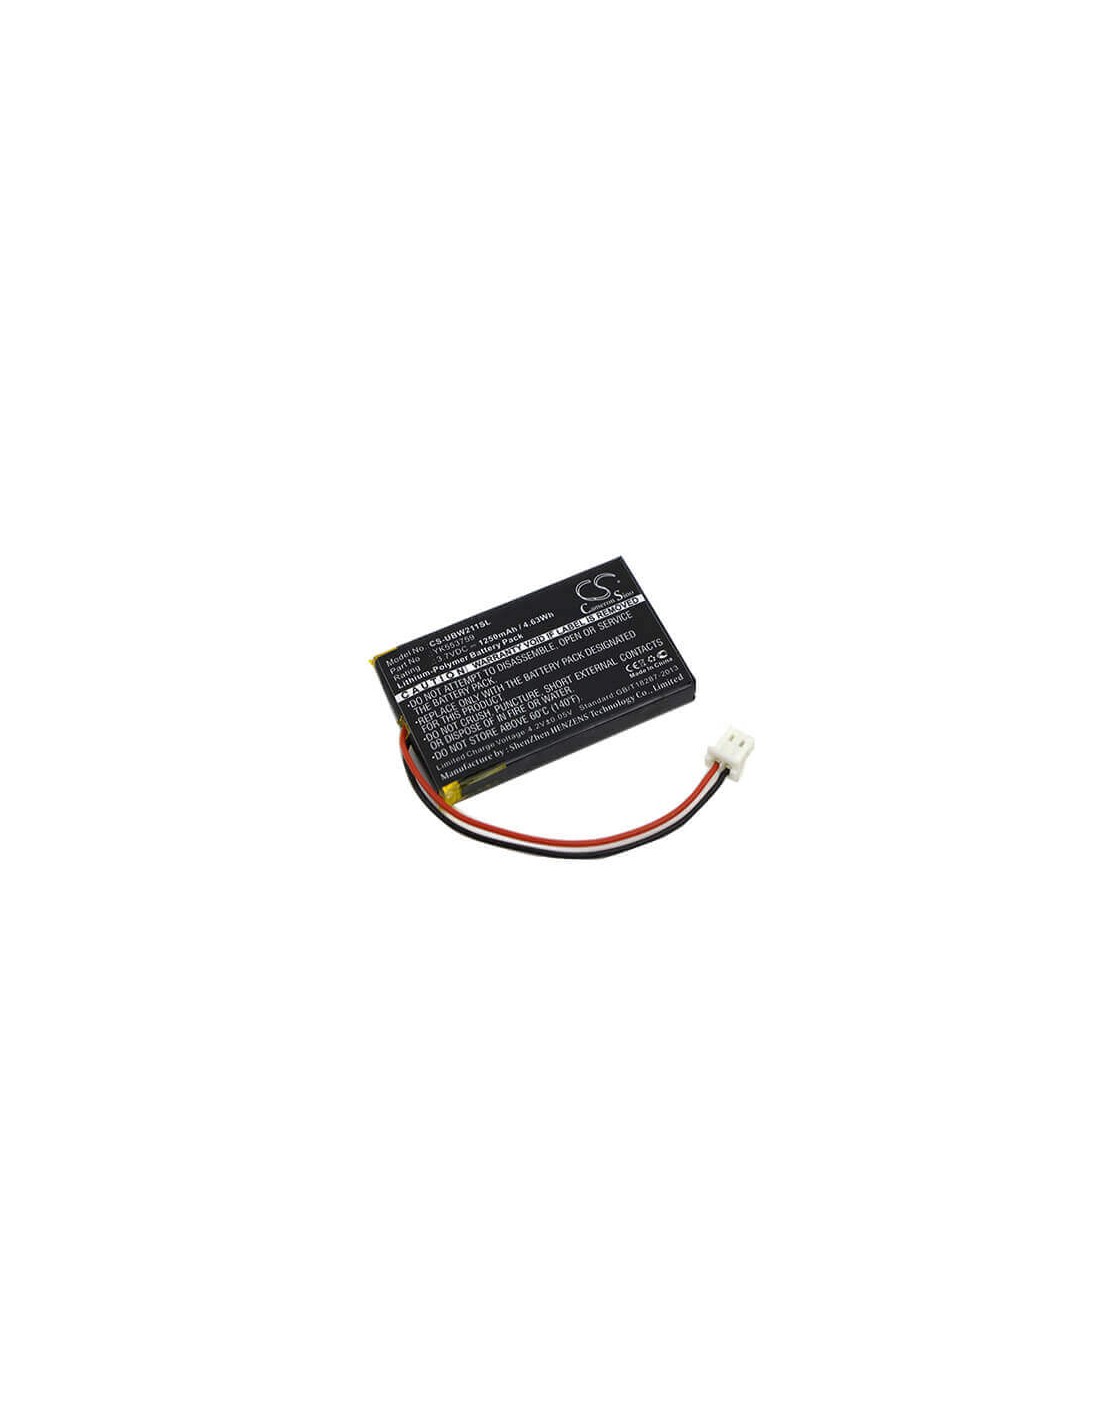 Battery for Uniden, Ubw2010c Monitor 3.7V, 1250mAh - 4.63Wh